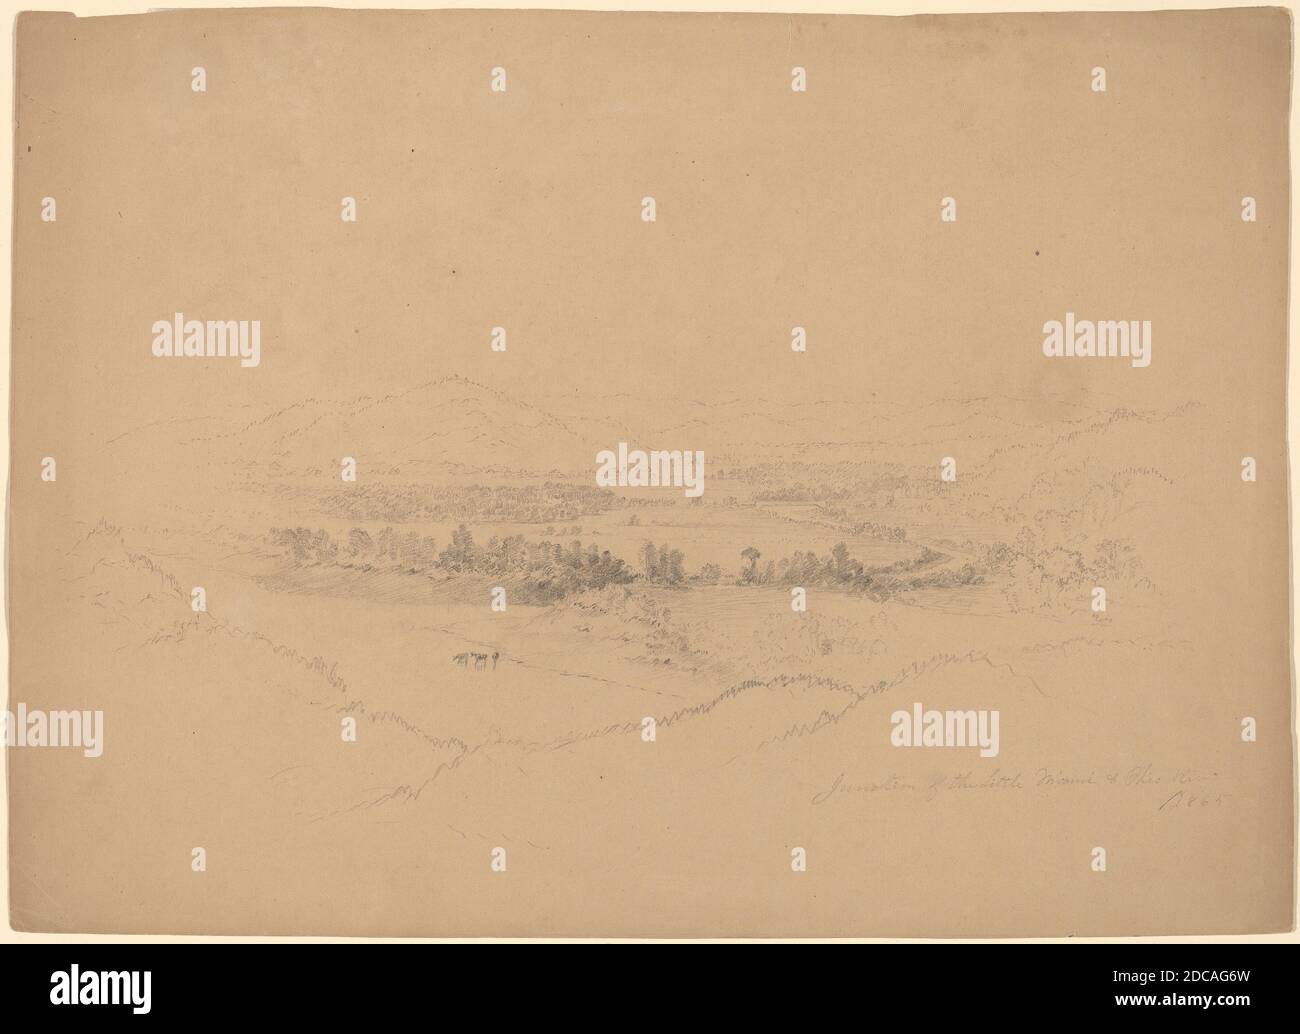 Alexander Helwig Wyant, (artist), American, 1836 - 1892, Miami and Ohio Rivers, 1865, graphite on tan wove paper, sheet: 26.6 × 36.9 cm (10 1/2 × 14 1/2 in Stock Photo